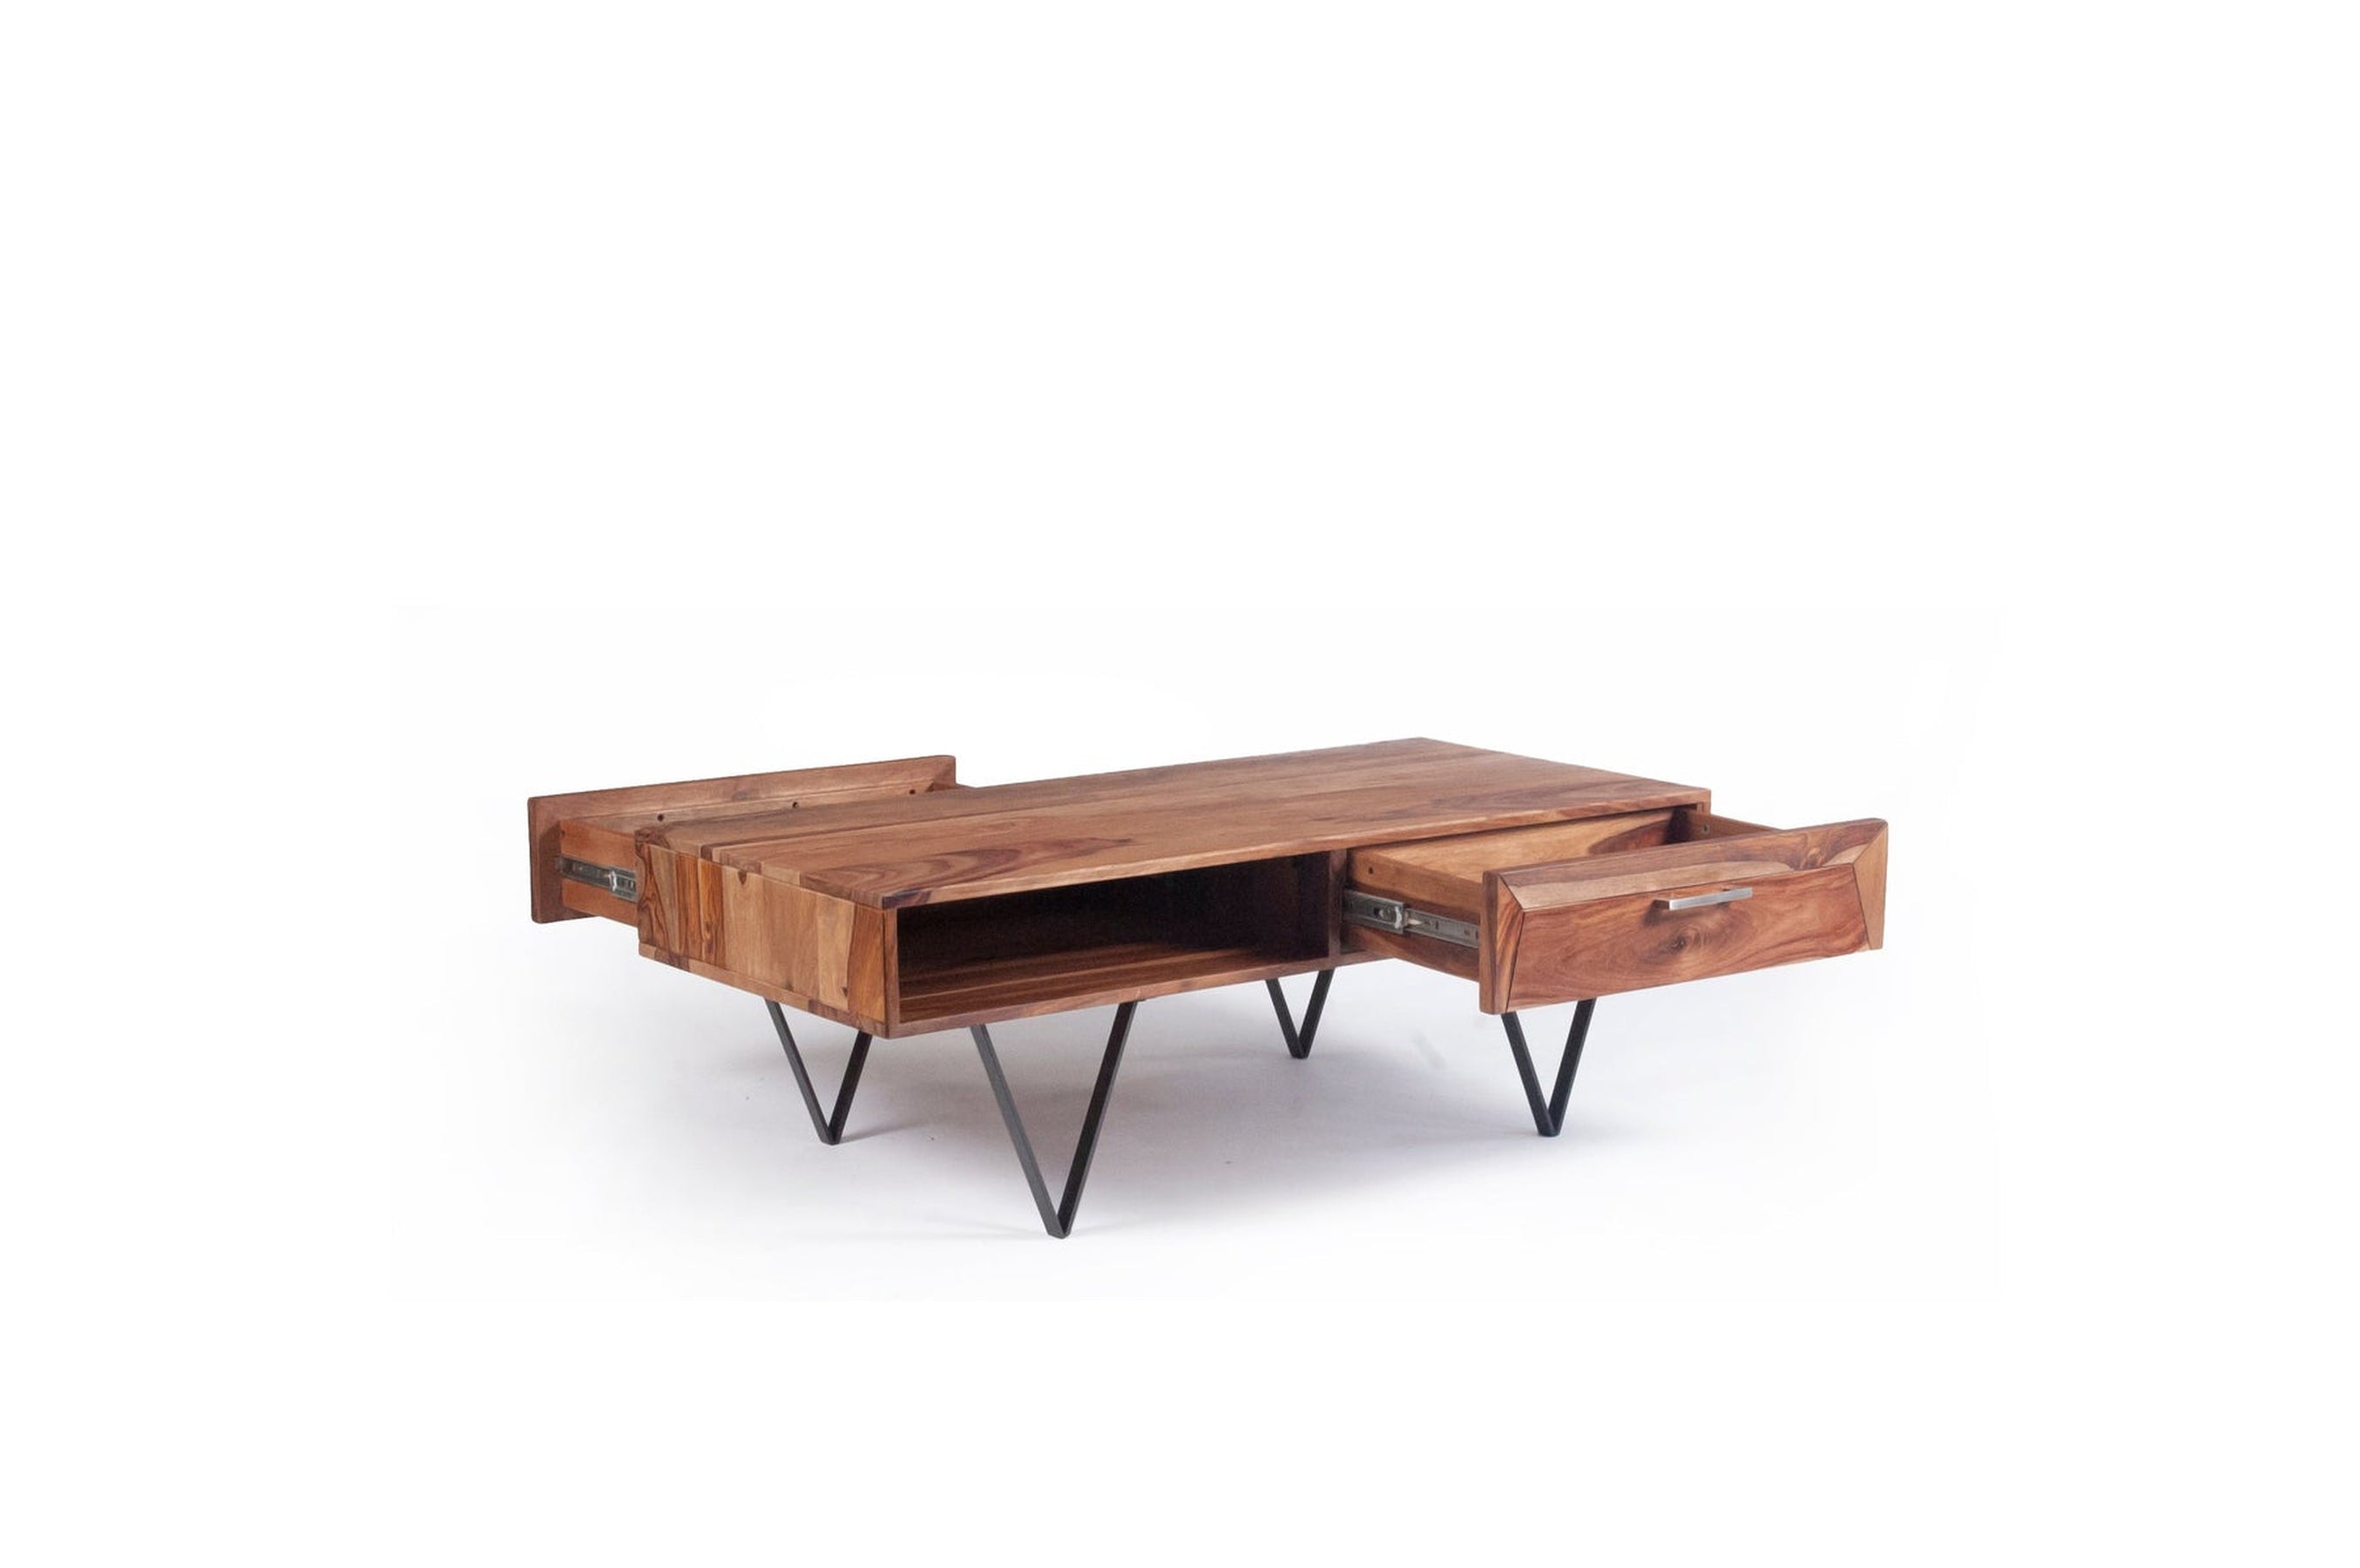 Metric Coffee Table with Drawers | Sofa Table with Storage | Wood Centre Table - Living Room or Office |  45x24x16 inches